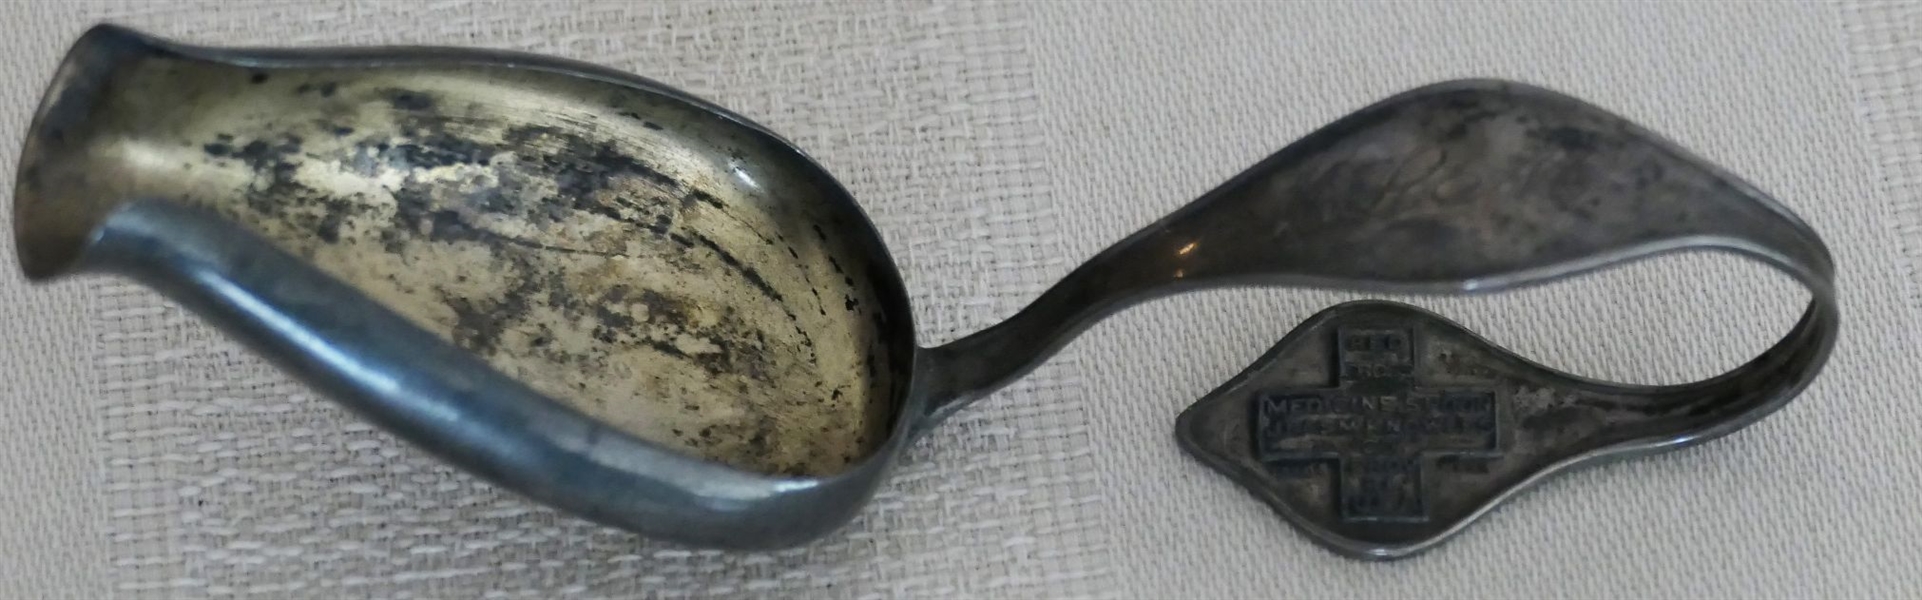 Sterling Silver "Red Cross Medicine Spoon" by J.B. & SM Knowles - Prov. RI - USA - Monogrammed on Handle 